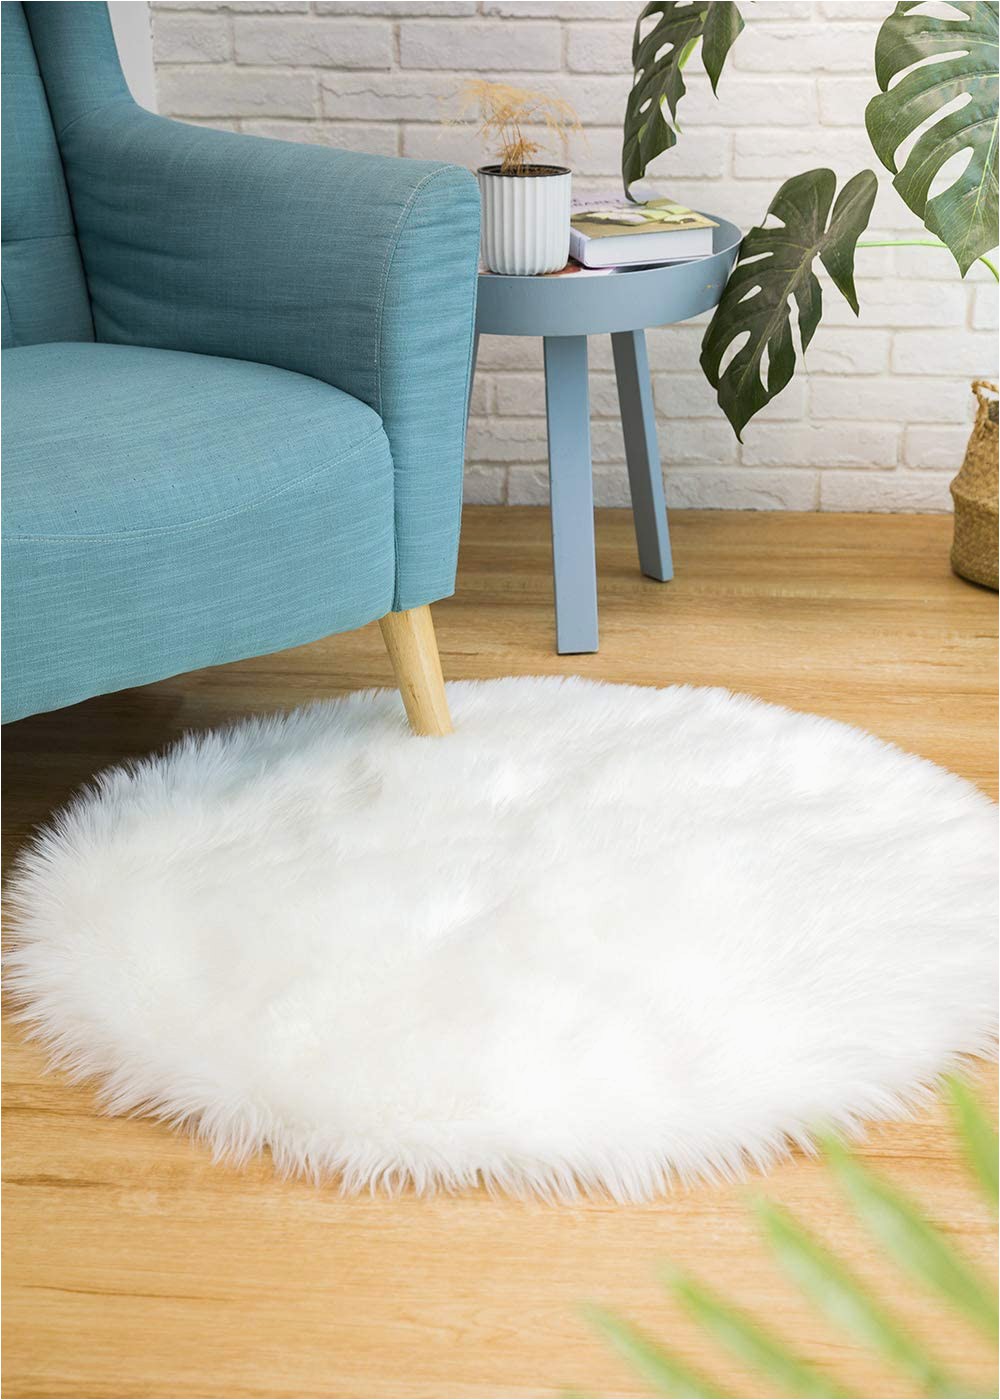 Soft and Plush area Rugs Ciicool soft Faux Sheepskin Fur area Rugs Round Fluffy Rugs for Bedroom Silky Fuzzy Carpet Furry Rug for Living Room Girls Rooms White 3 X 3 Feet